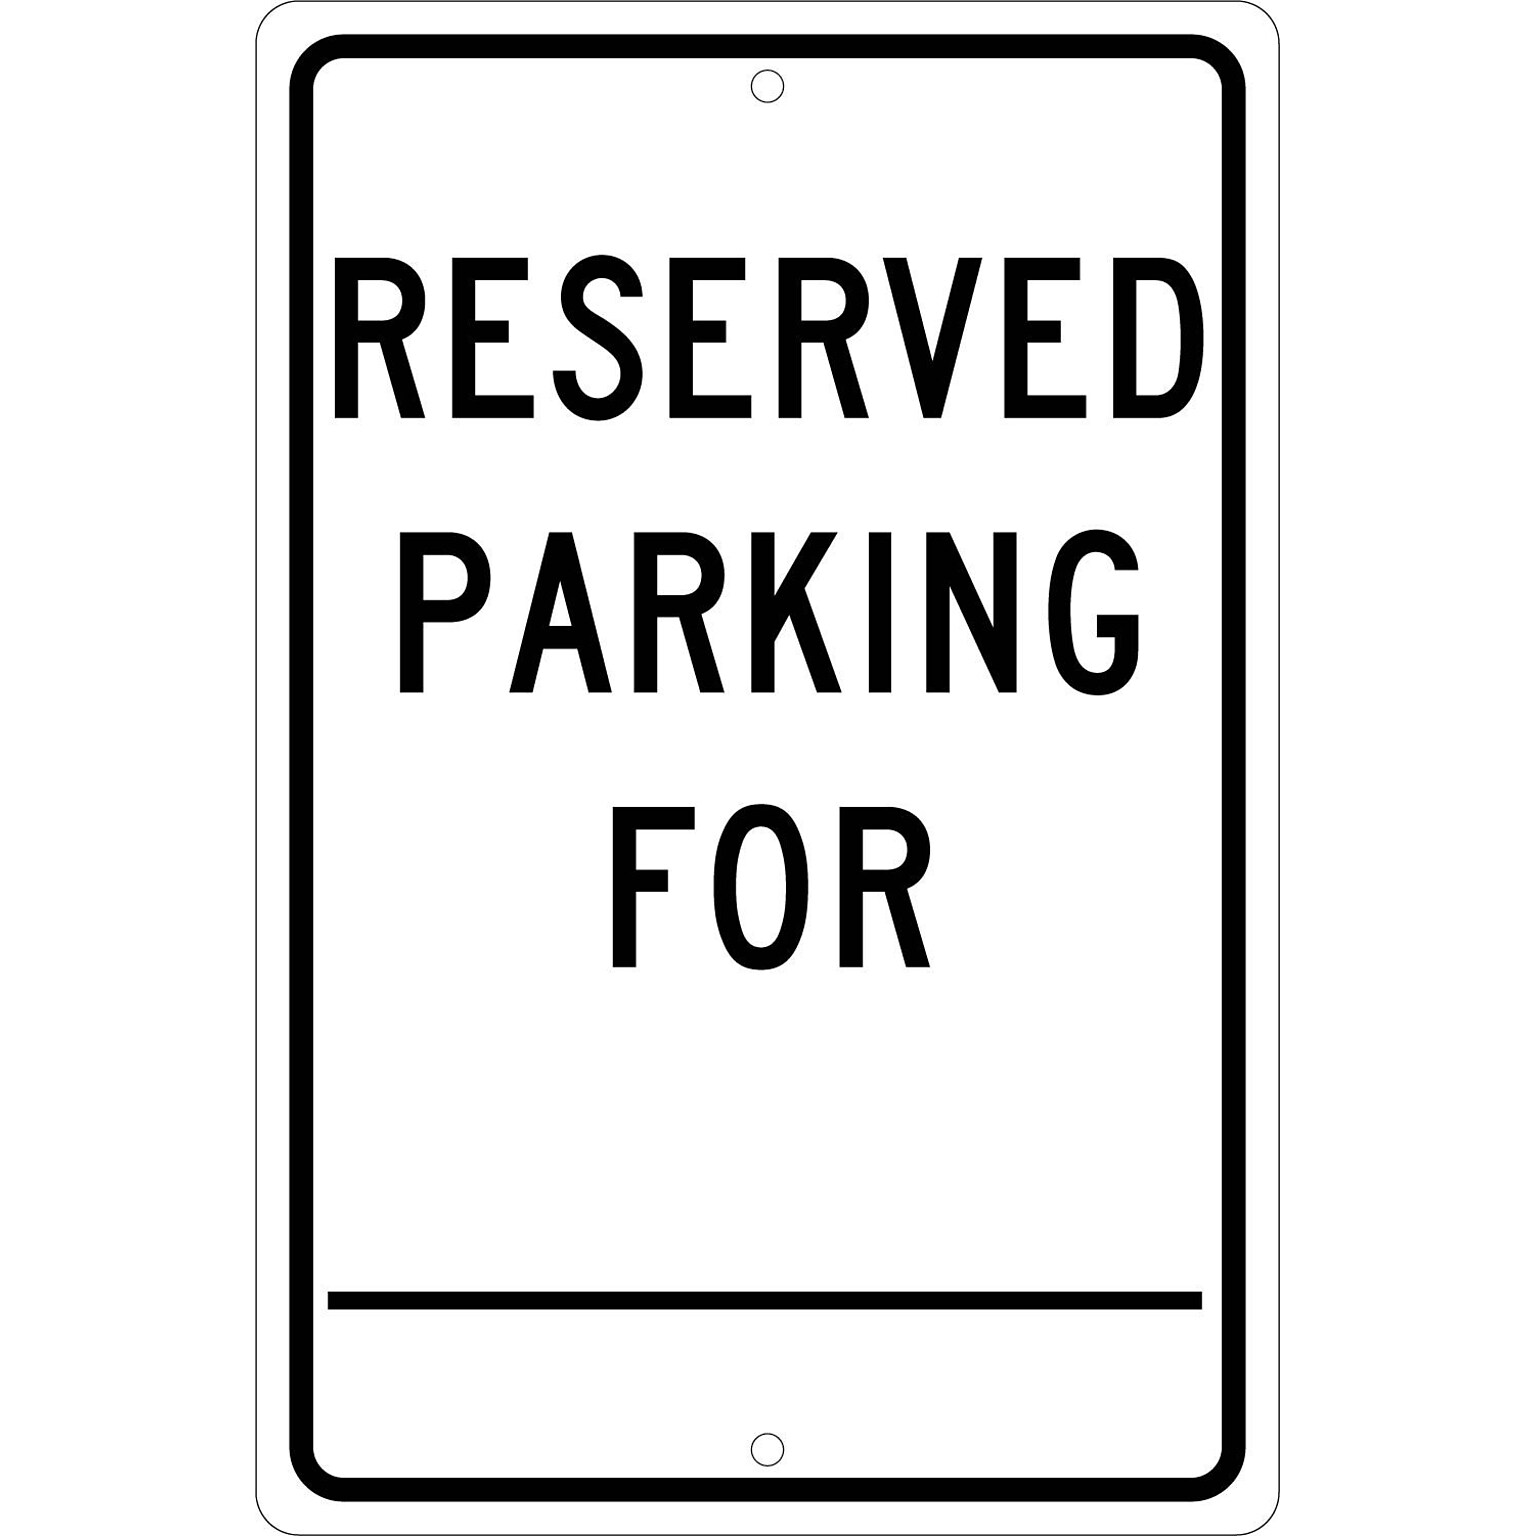 Parking Signs; Reserved Parking For ________., 18X12, .063 Aluminum